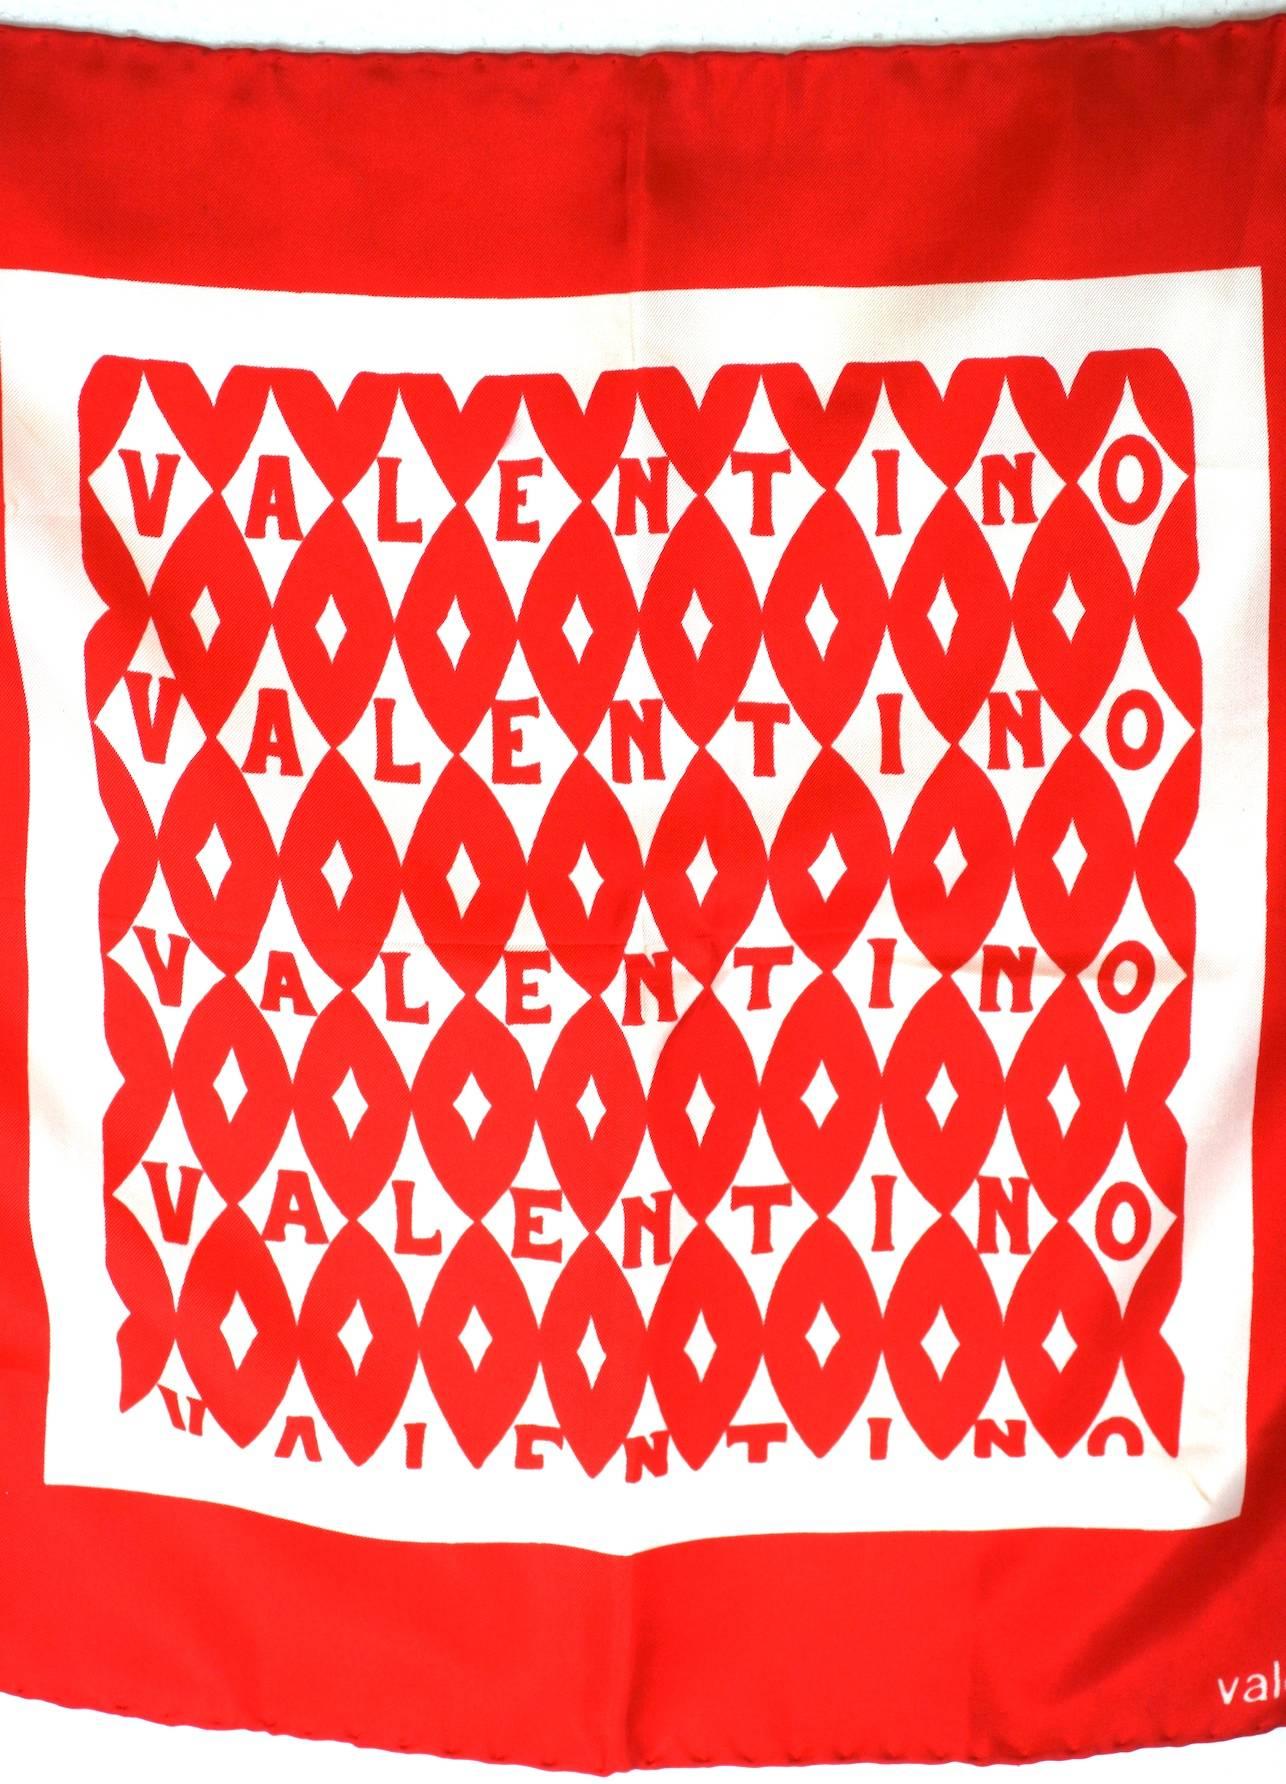 Valentino Silk Twill Logo Scarf in graphic red and white.This archival design from the 1970's,  has recently been reintroduced by Valentino for its RTW collections.
1970's Italy.  16